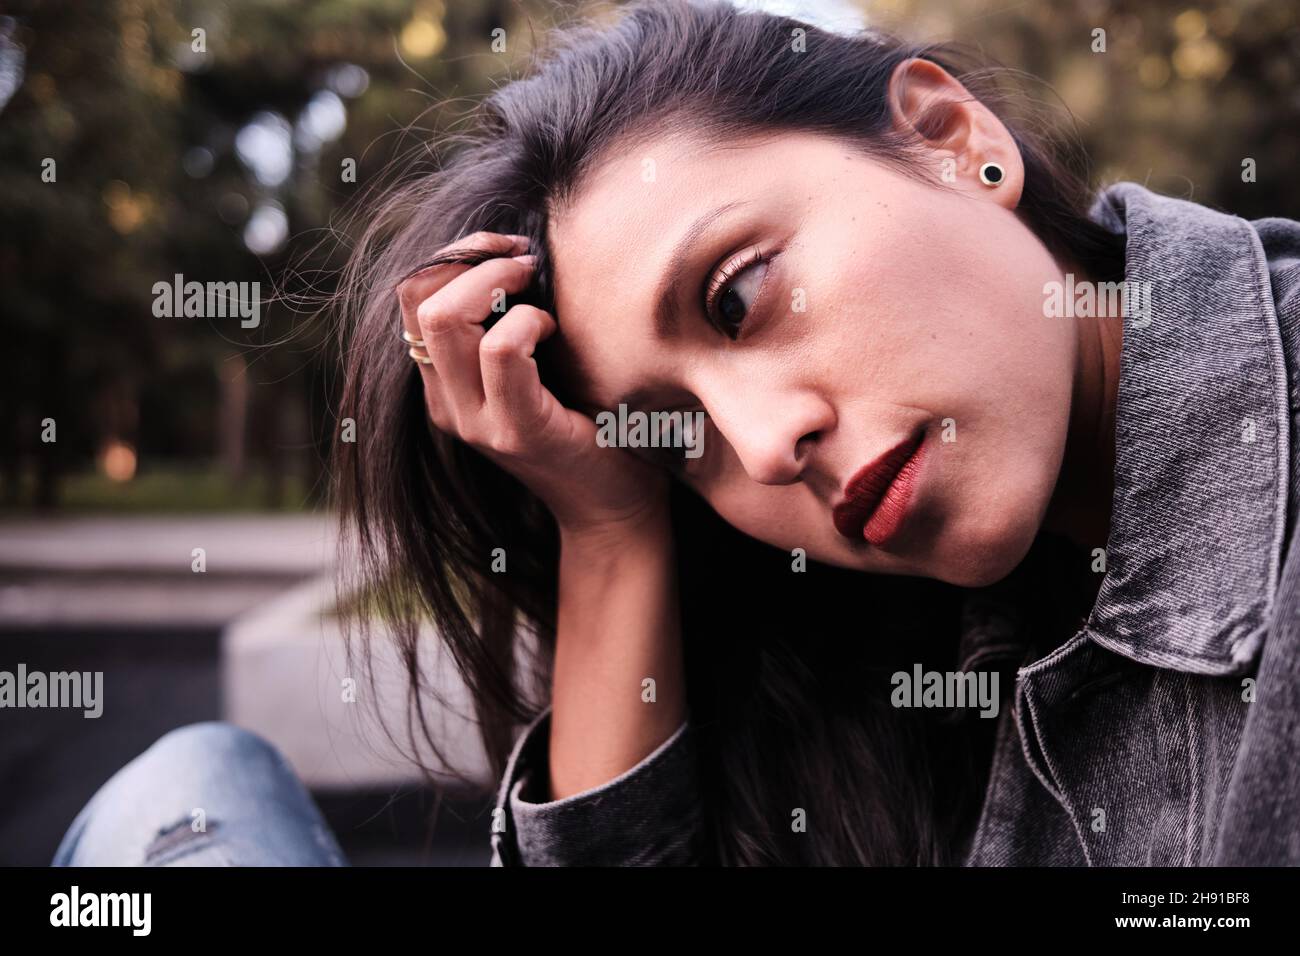 A preoccupied gilrl holding her head in her hand. Stock Photo